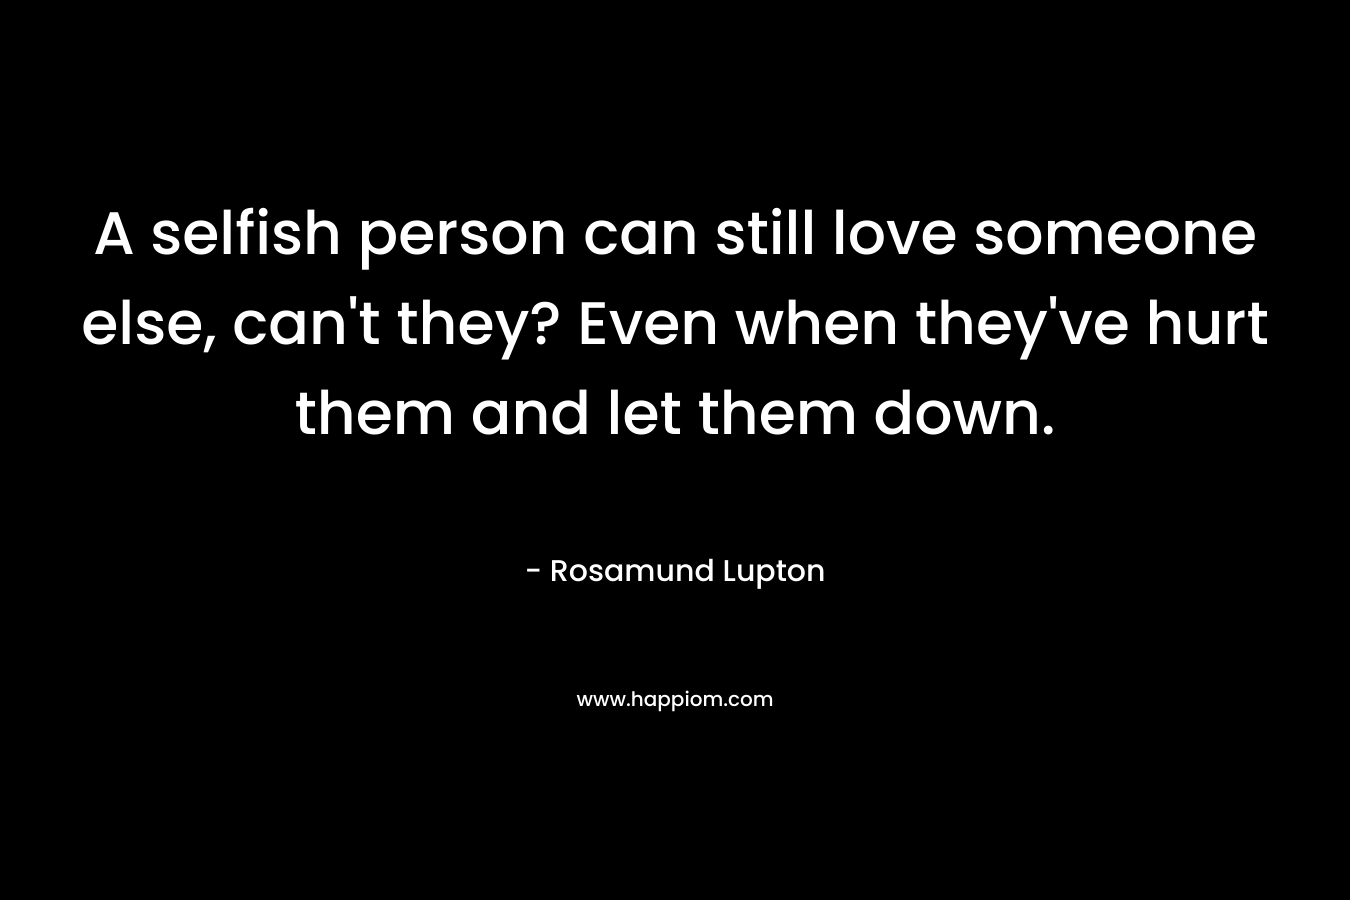 A selfish person can still love someone else, can’t they? Even when they’ve hurt them and let them down. – Rosamund Lupton